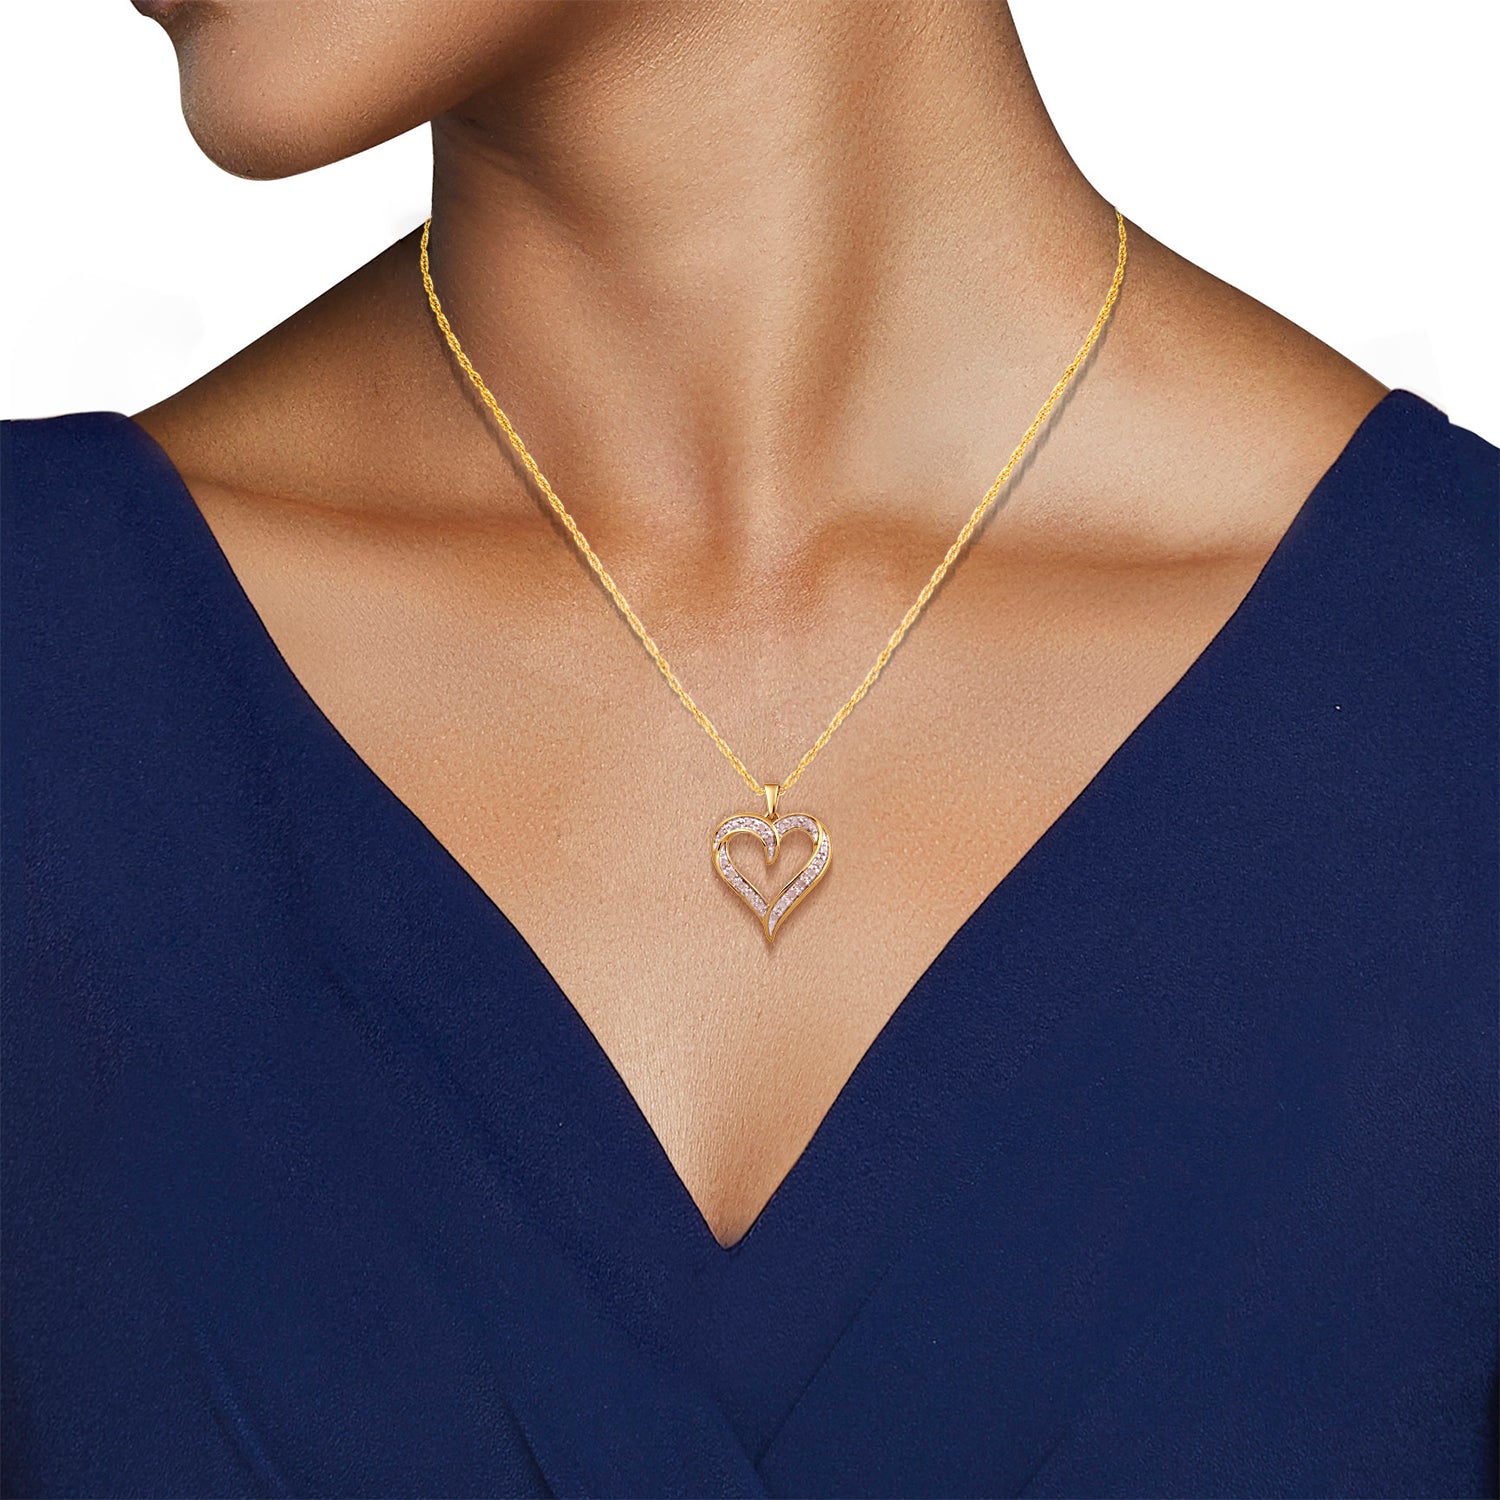 Jewelili Diamond Necklace Heart Jewelry in Yellow Gold Over